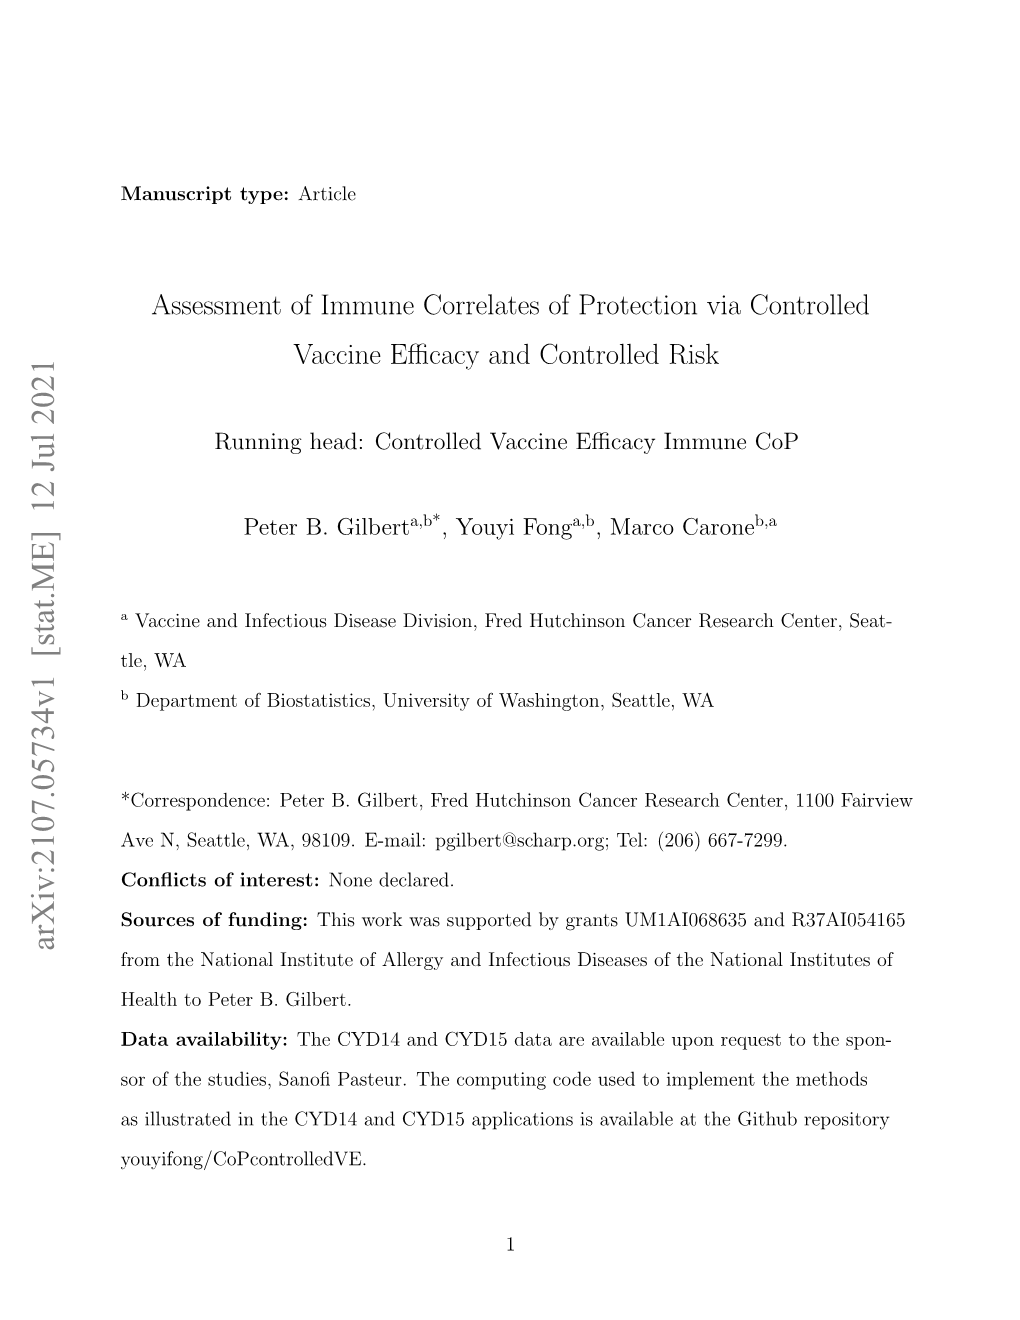 Assessment of Immune Correlates of Protection Via Controlled Vaccine Eﬃcacy and Controlled Risk